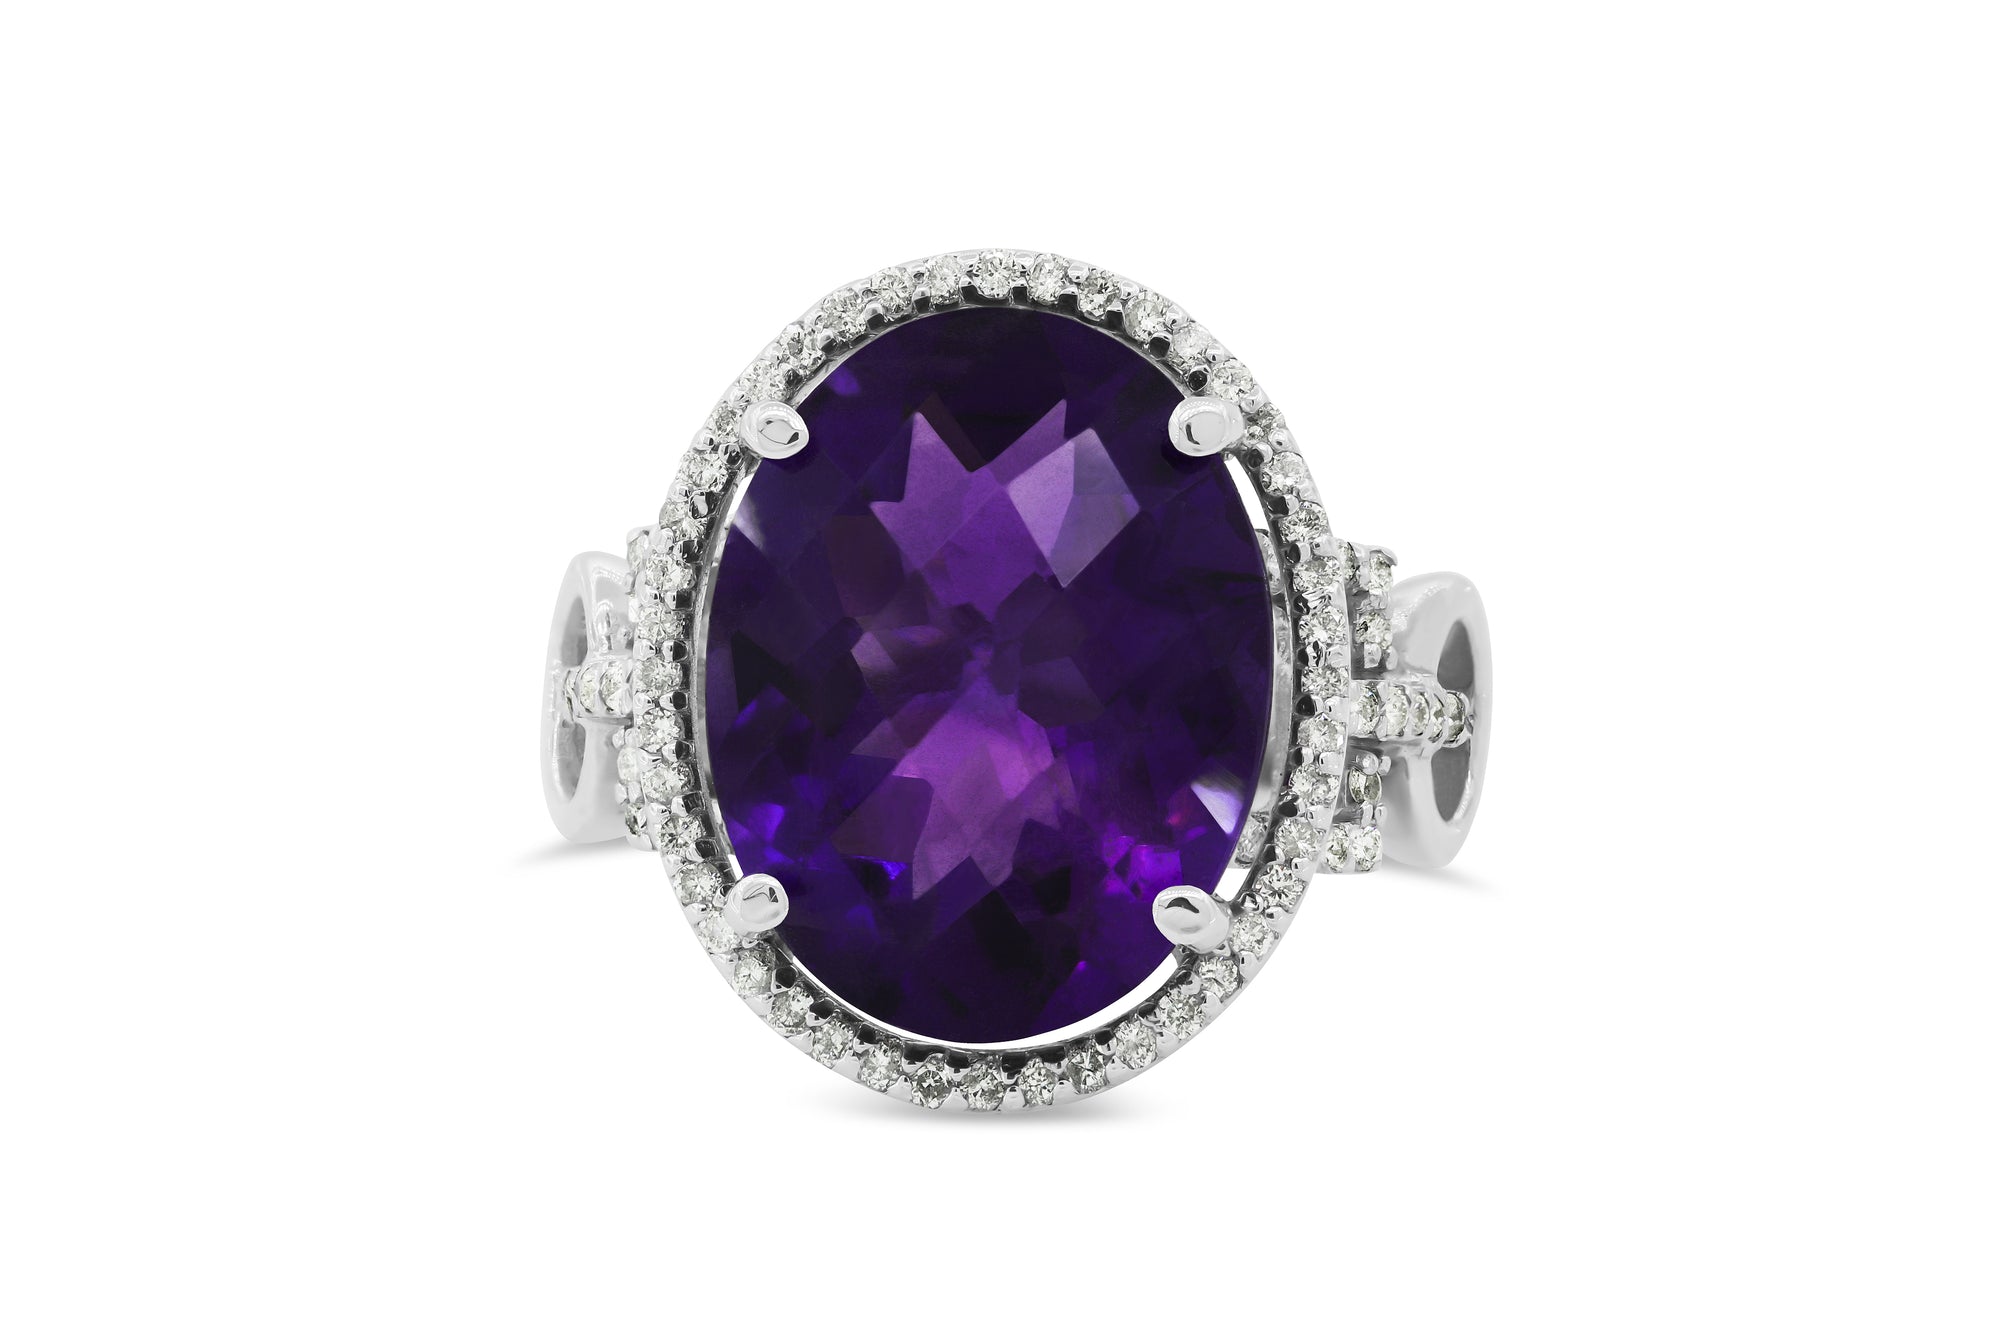 8.1 CT Oval Amethyst Diamond Ring 0.41 CT TW 14K White Gold AMR002 - NorthandSouthJewelry